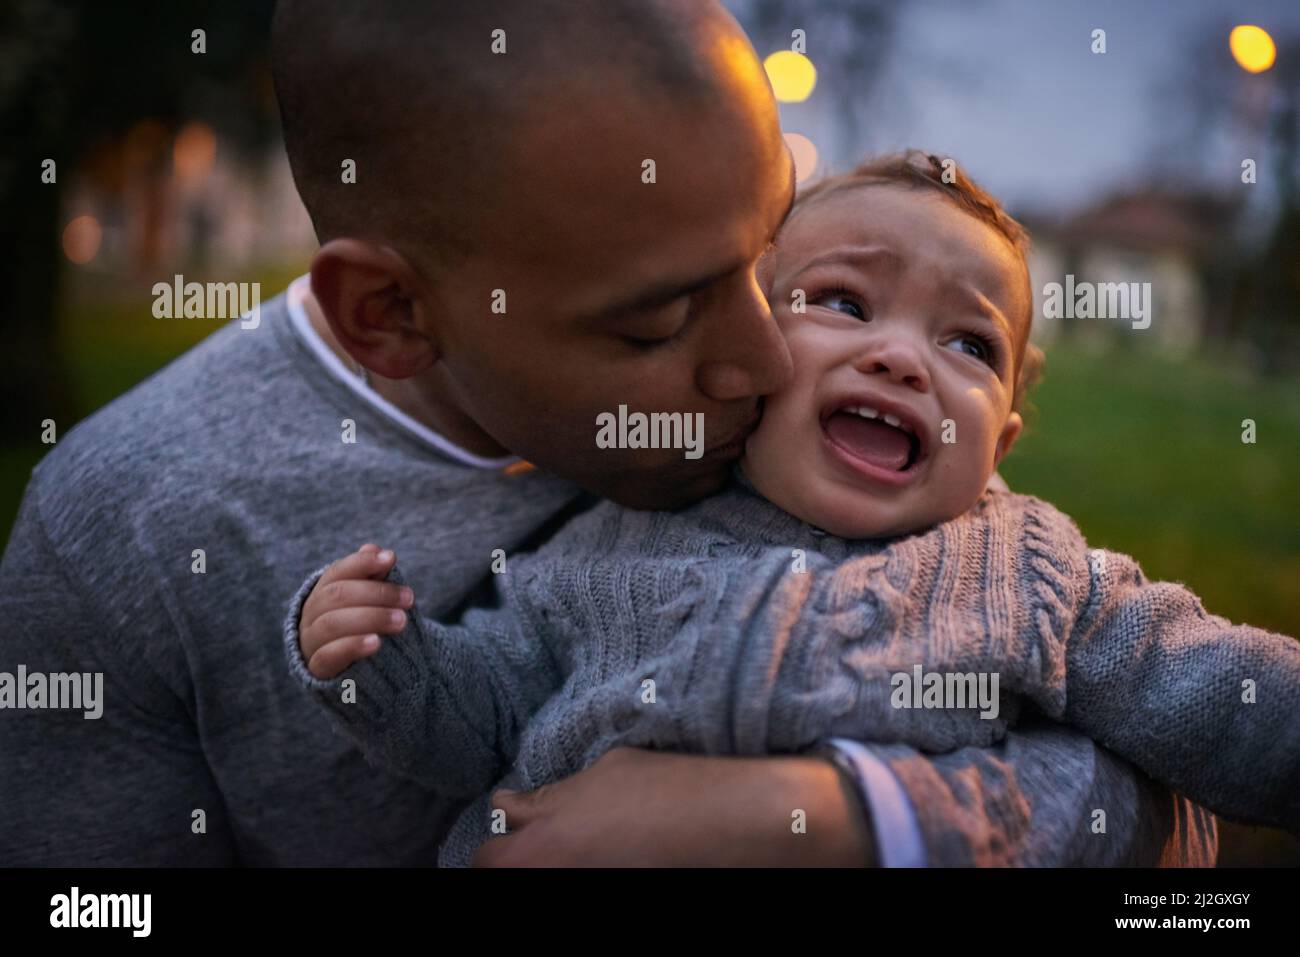 Dont cry buddy, Im right here. Shot of a father comforting his crying son outdoors. Stock Photo